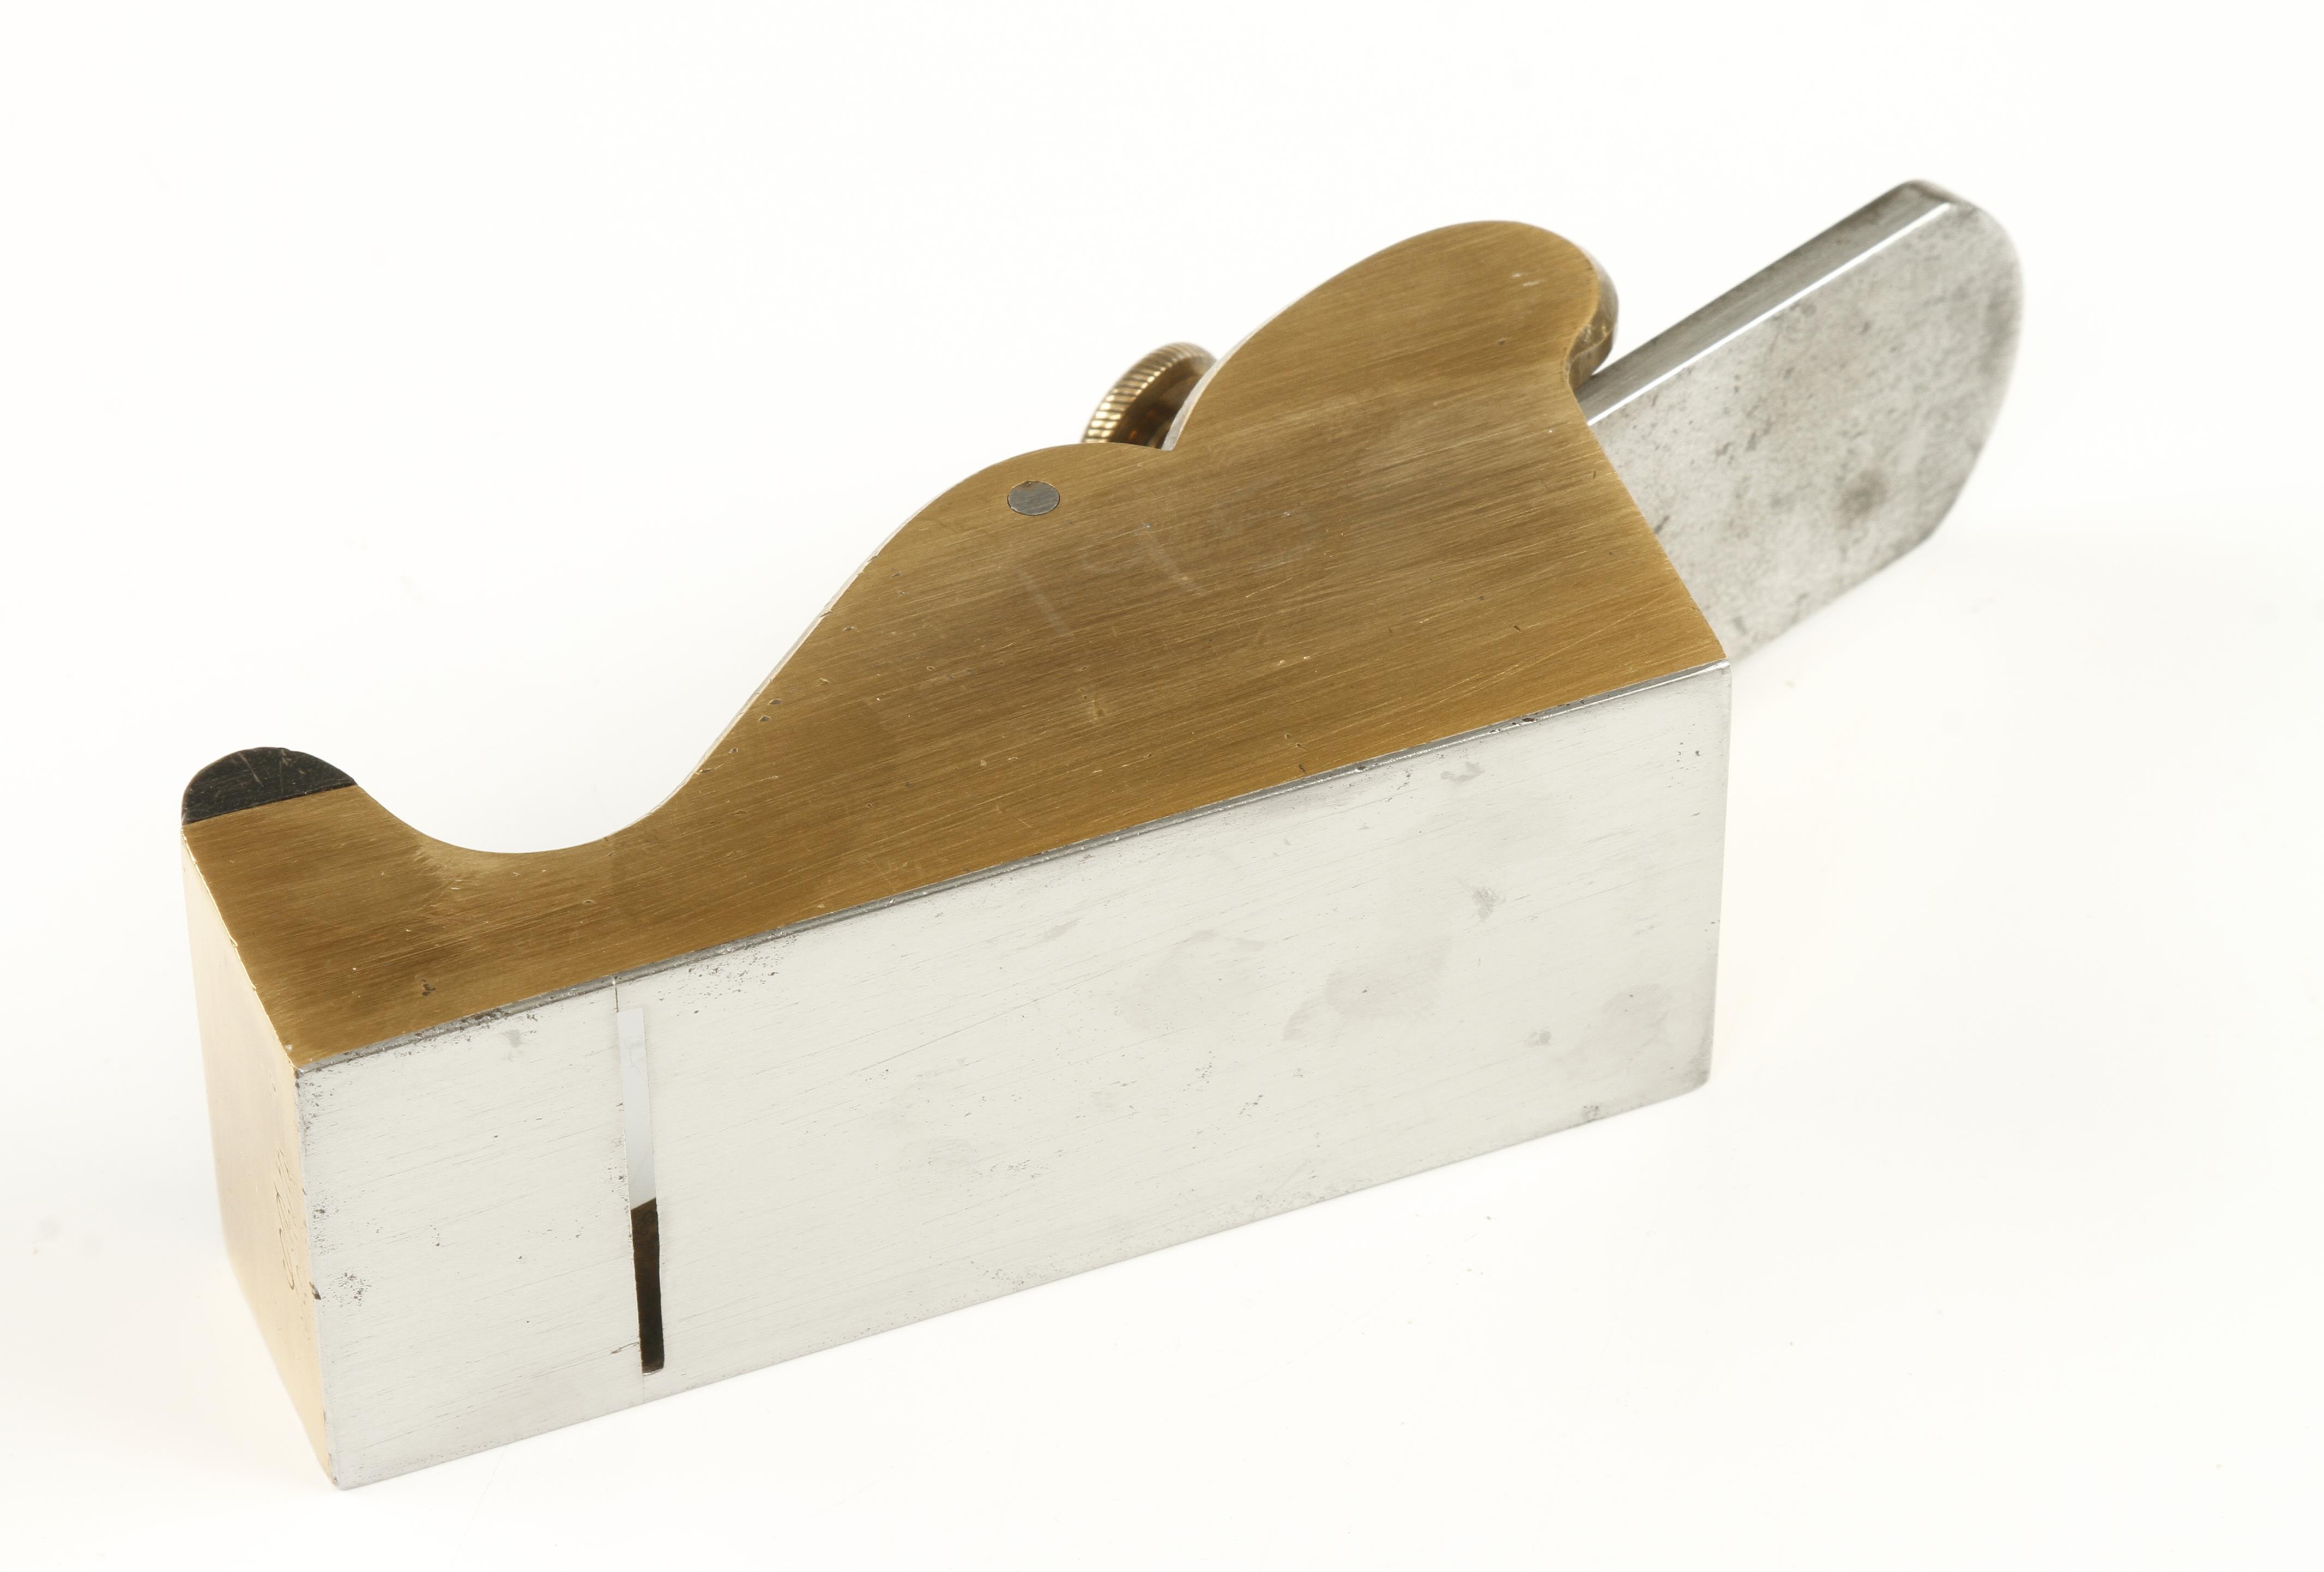 A steel soled brass chariot plane 4 1/2" x 1 3/4" with brass holding screw through ebony lever G+ - Image 3 of 3